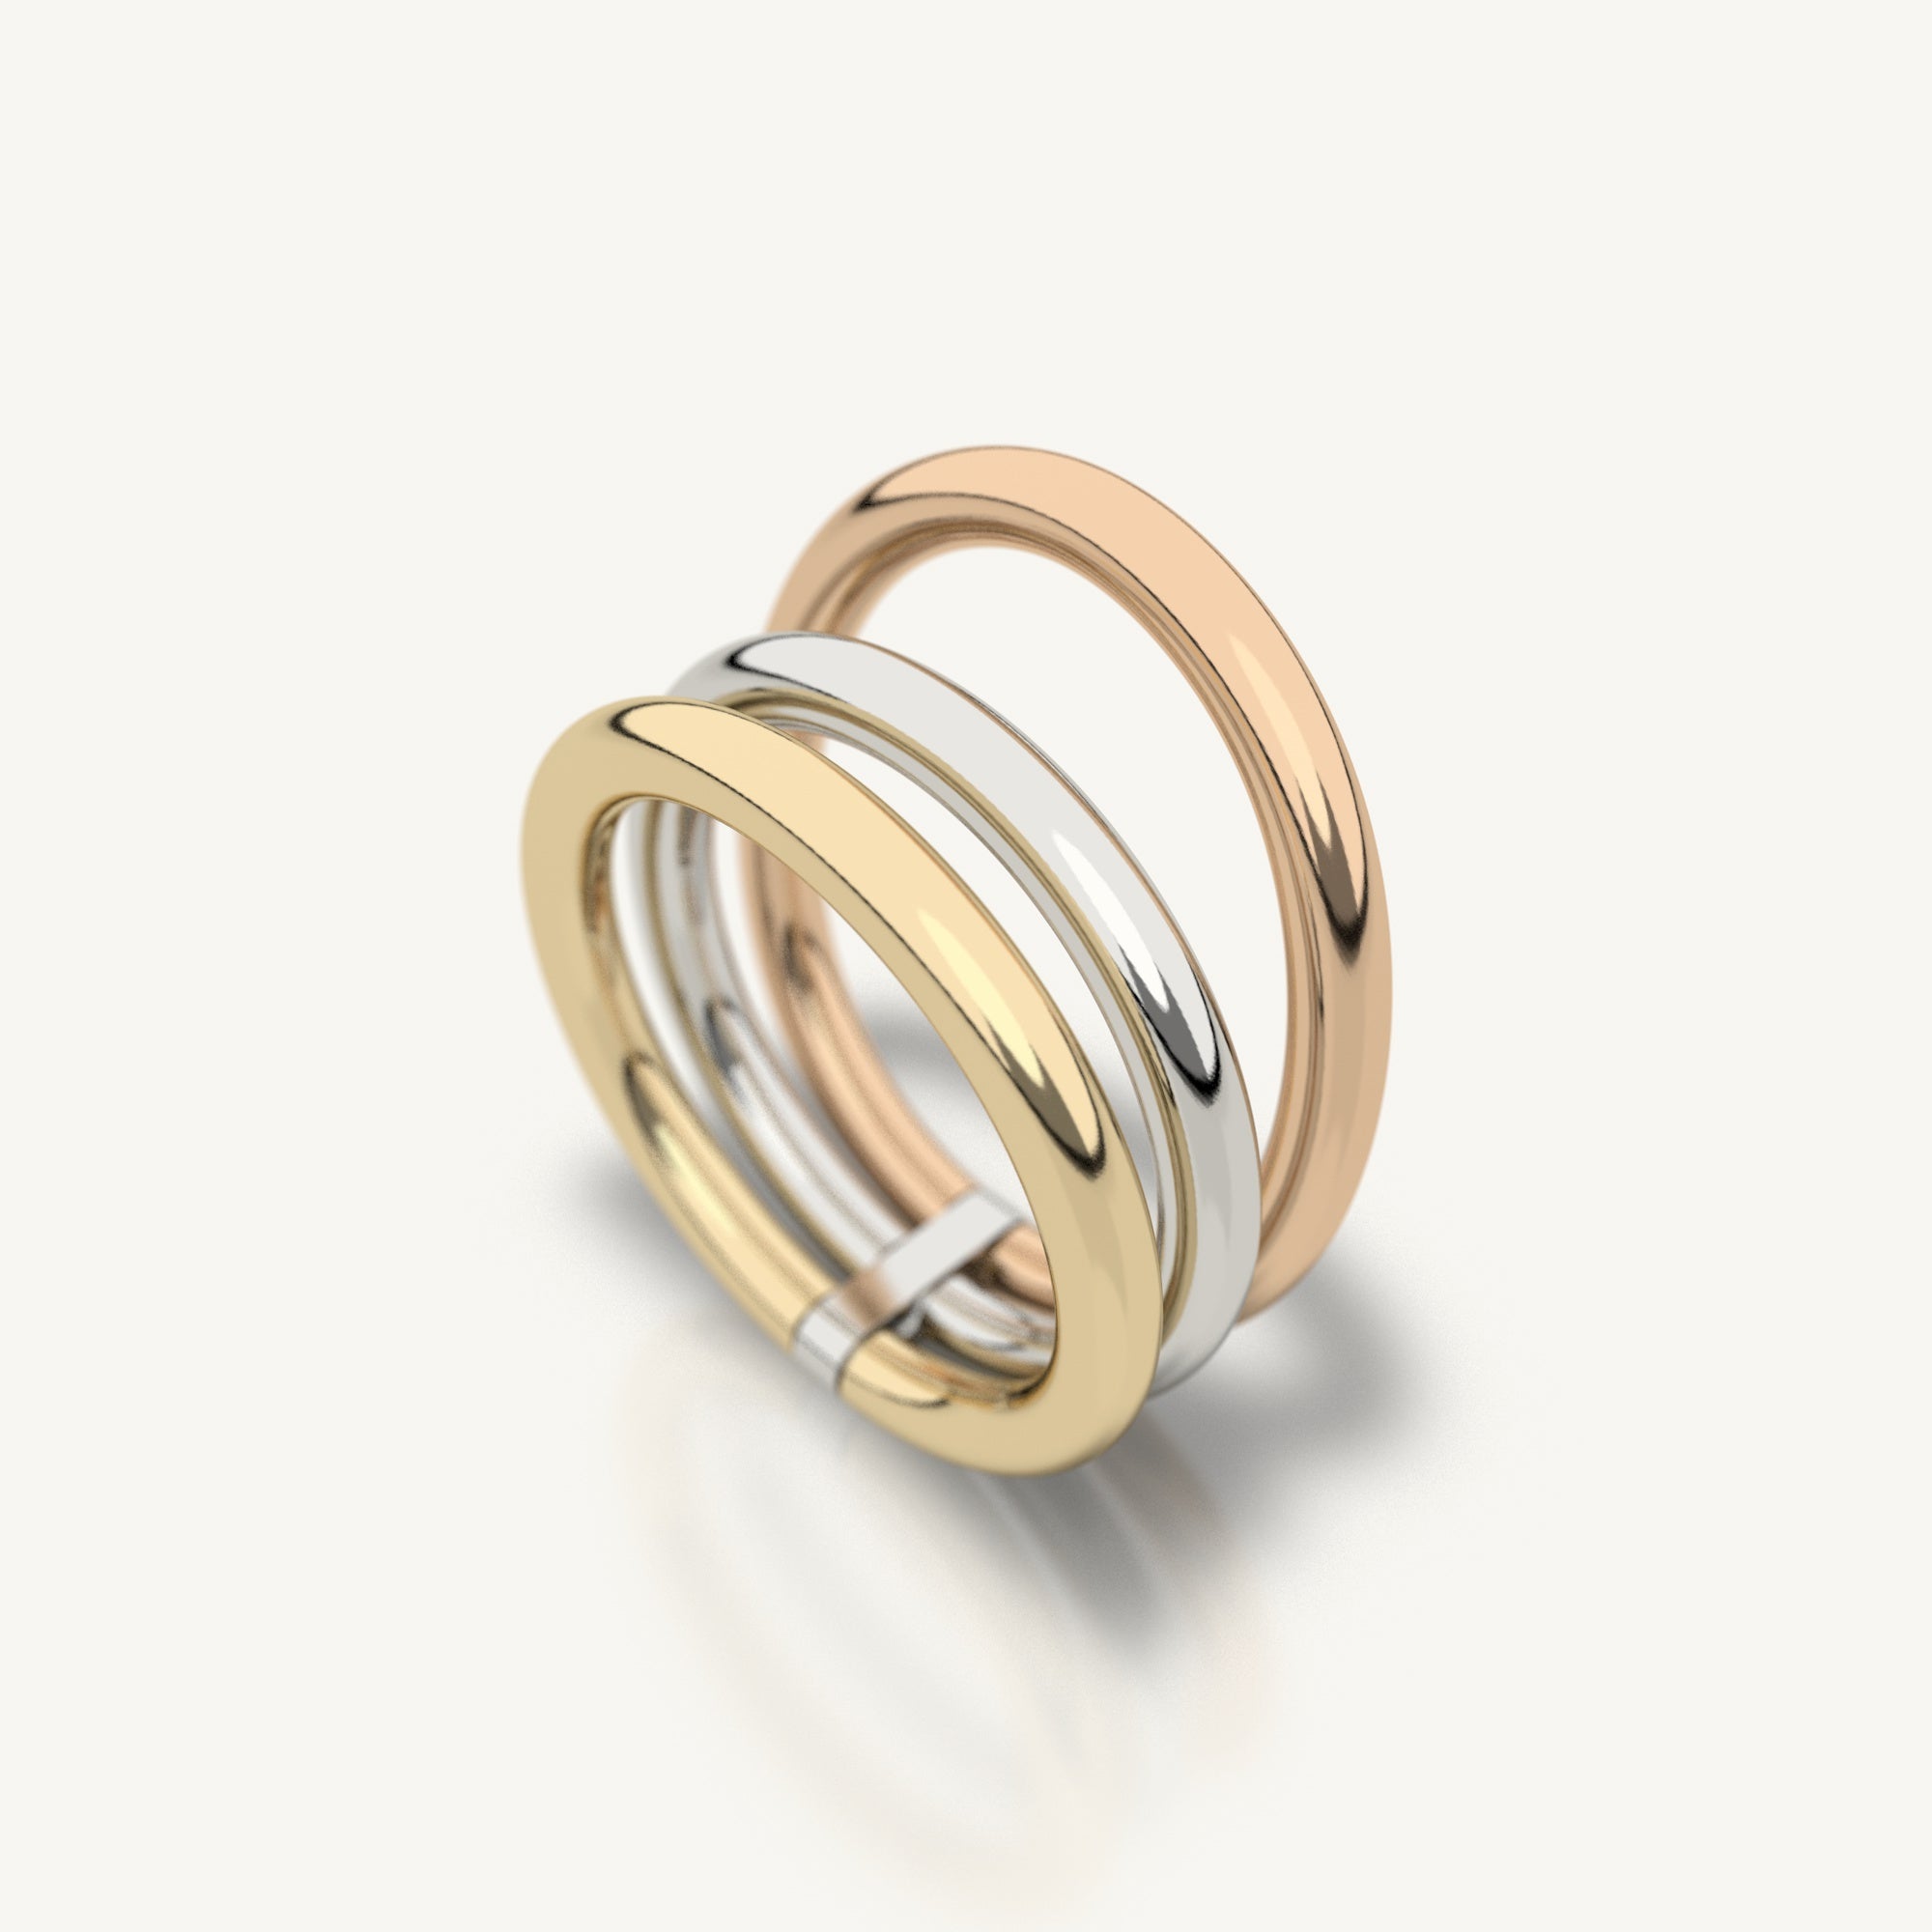 Trio ring from Inacio made from 18k recycled yellow gold, white gold, and rose gold